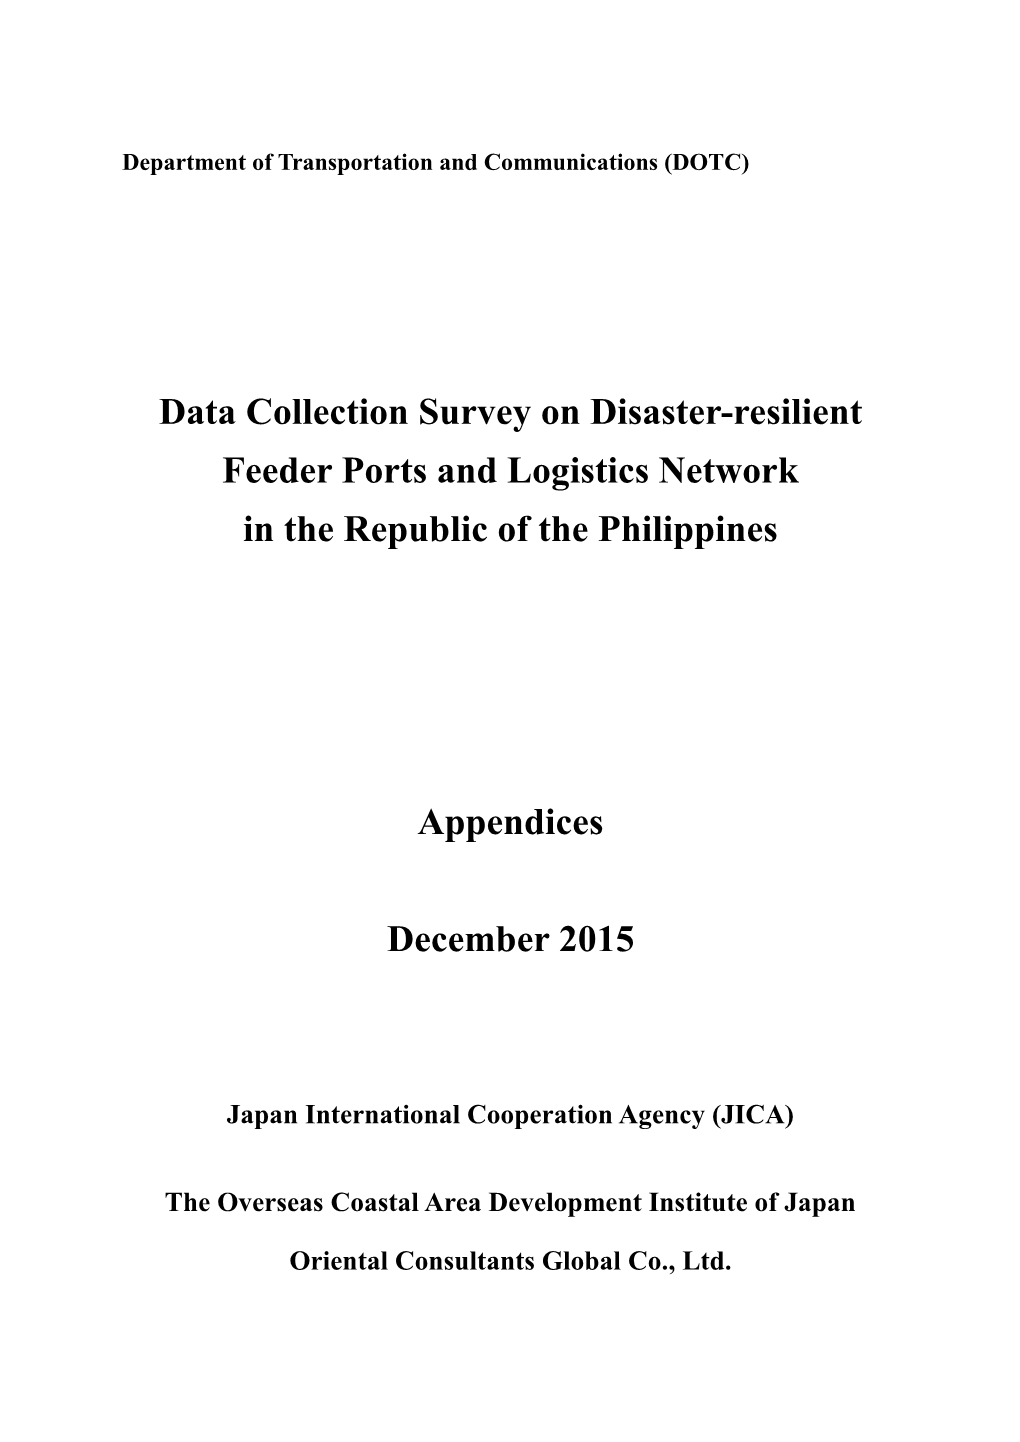 Data Collection Survey on Disaster-Resilient Feeder Ports and Logistics Network in the Republic of the Philippines